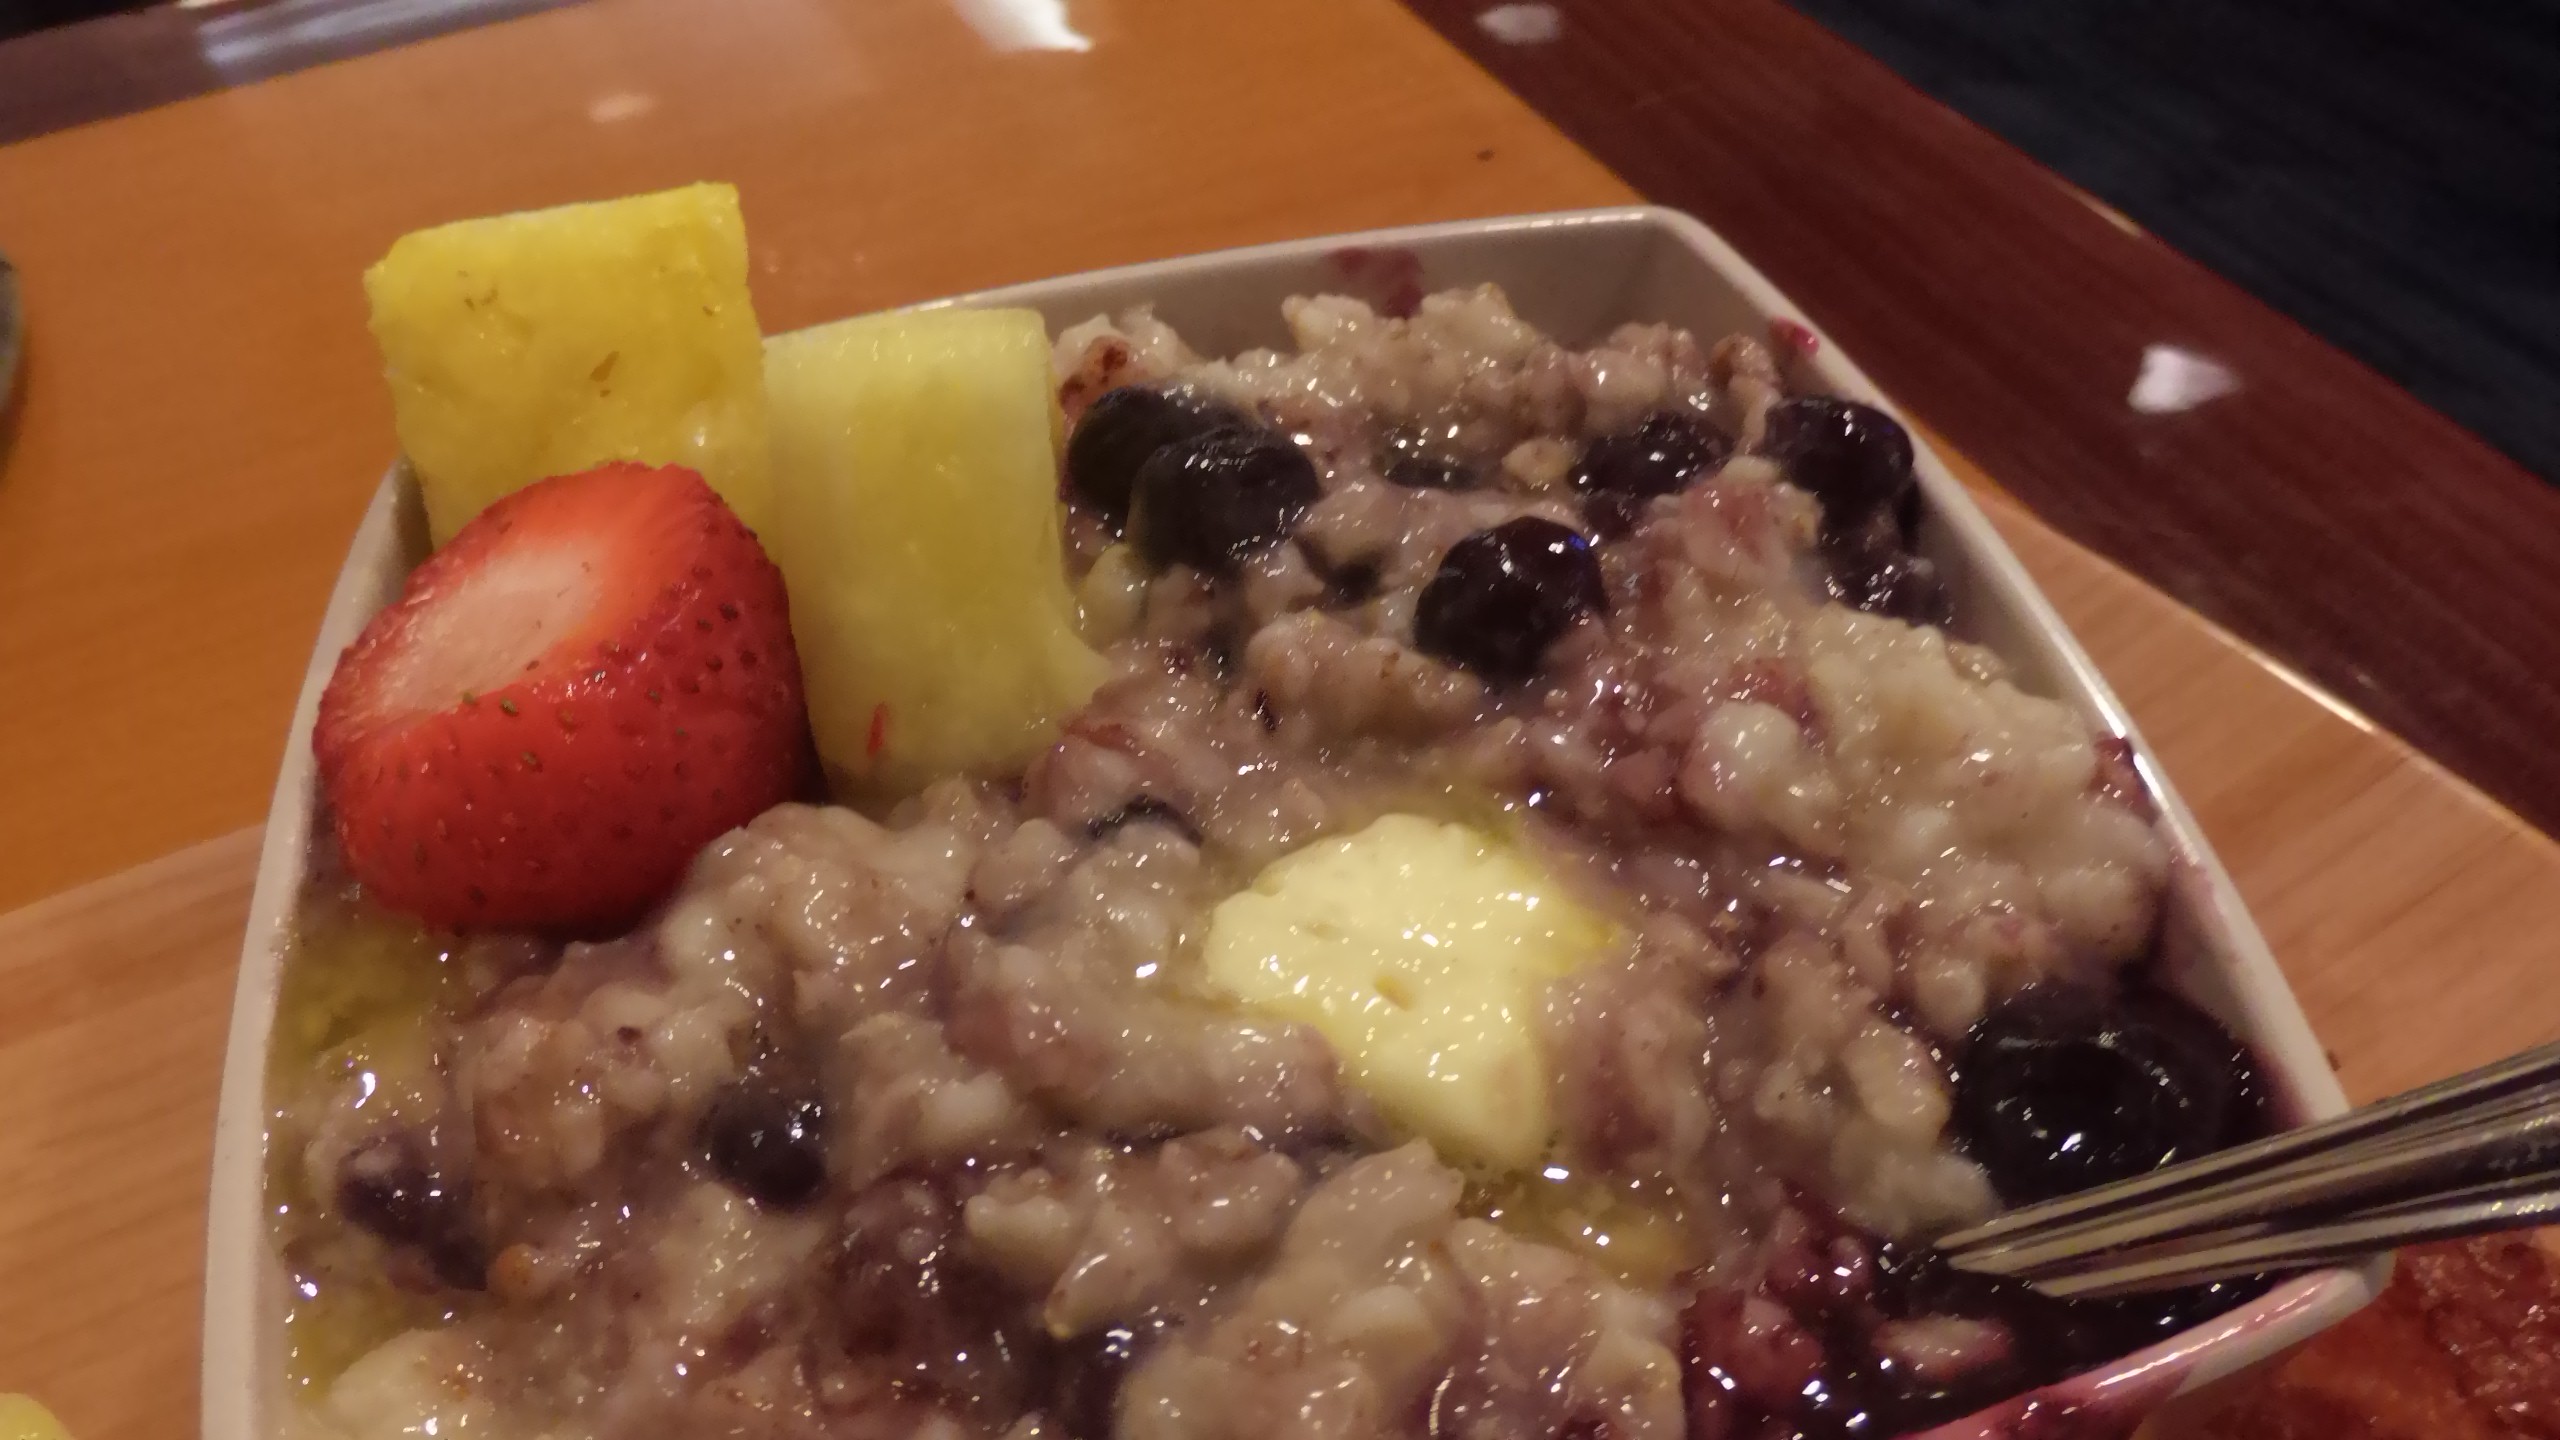 blueberry oatmeal with fruit